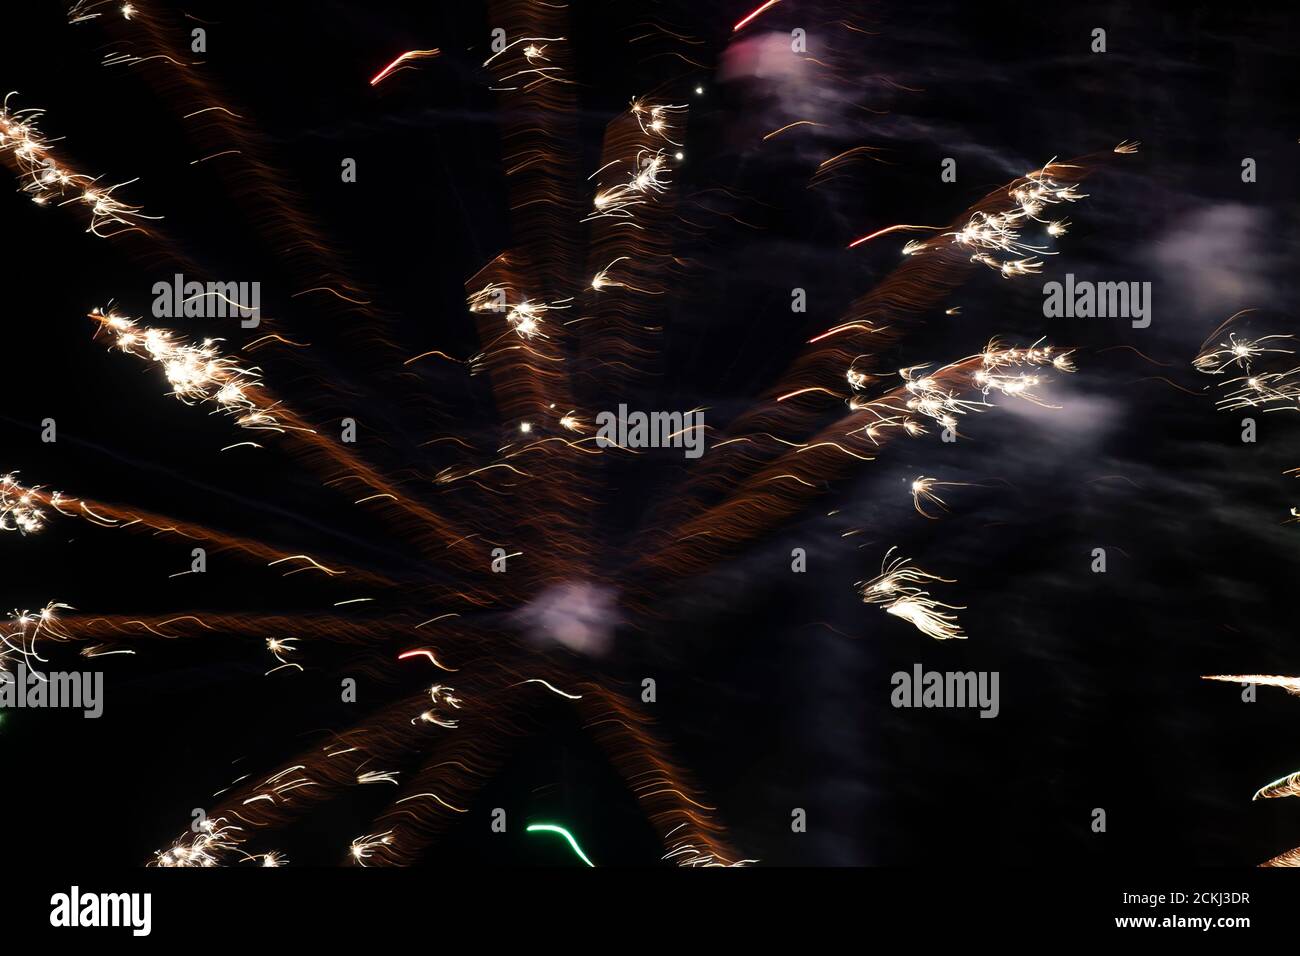 Light spots of fireworks of golden color on a long exposure on a black background. Festive background. Stock Photo